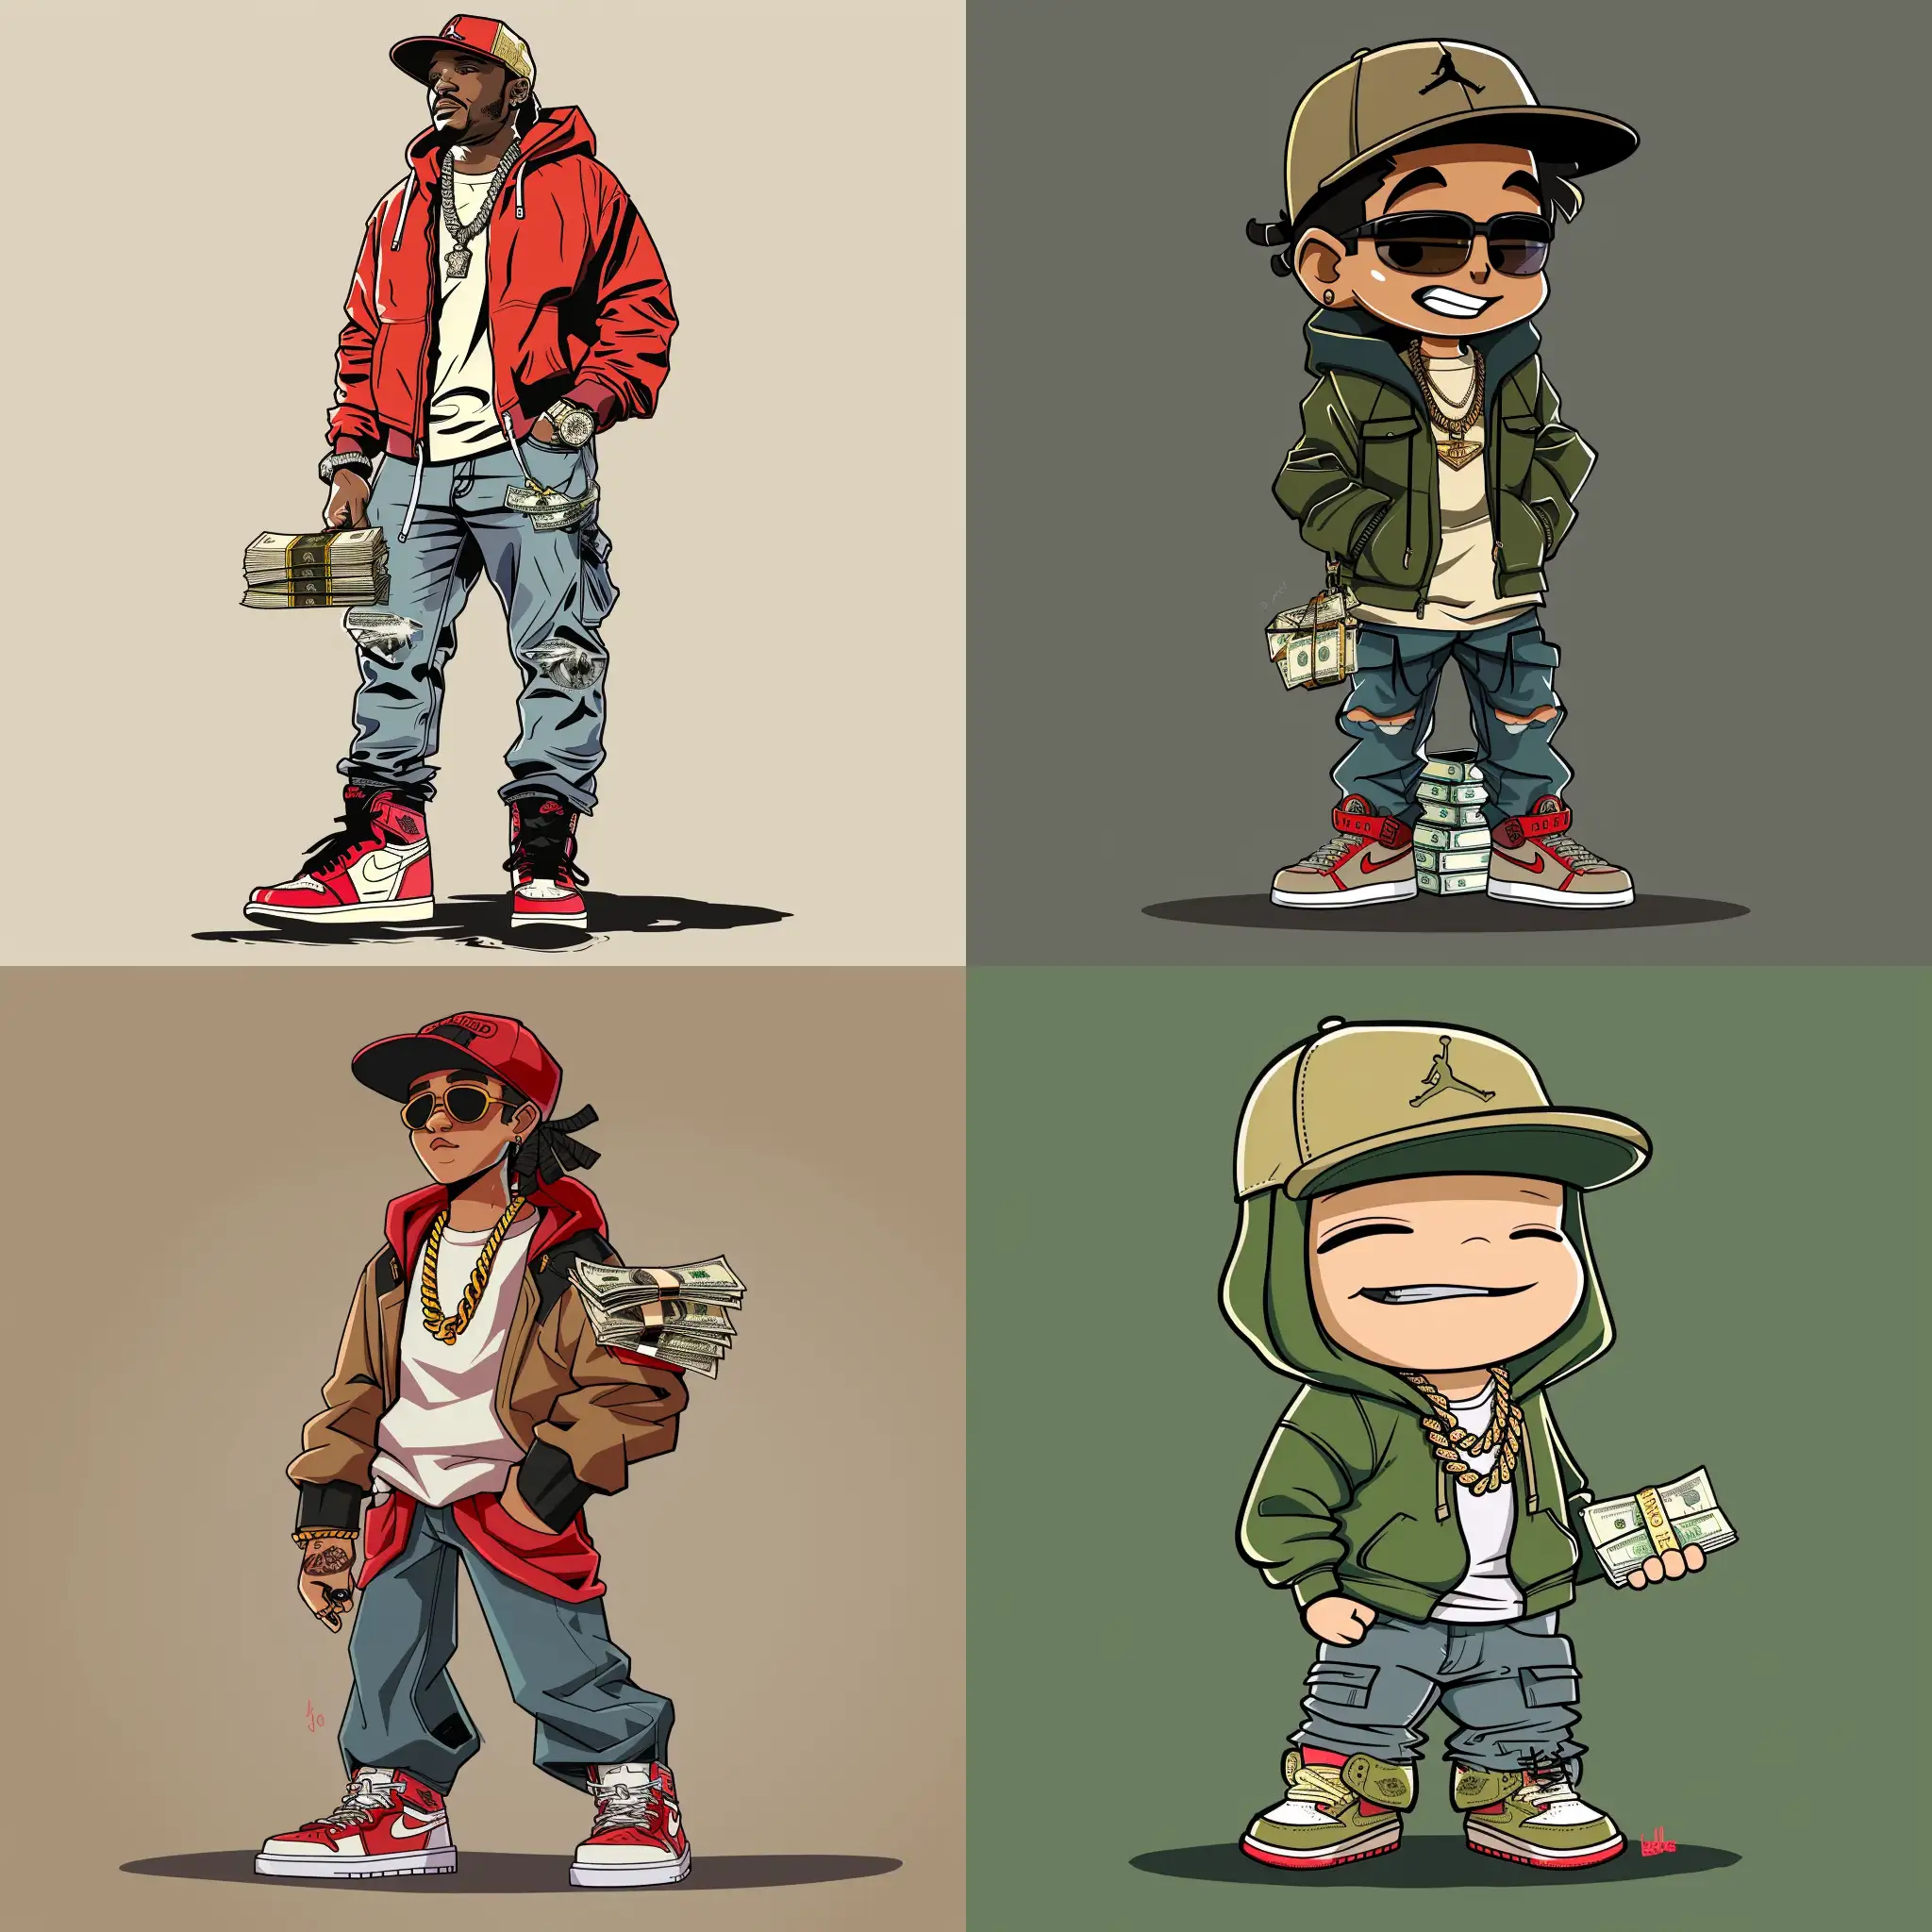 CREATE ME A CARTOON OF ELM ER FUDD WITH A SNAPBACK HAT, HOODIE, JEANS, DESIGNER BELT, CUBAN LINK CHAIN ON, STACK OF MONEY IN HIS HAND AND JORDAN RETRO 6 SHOES

